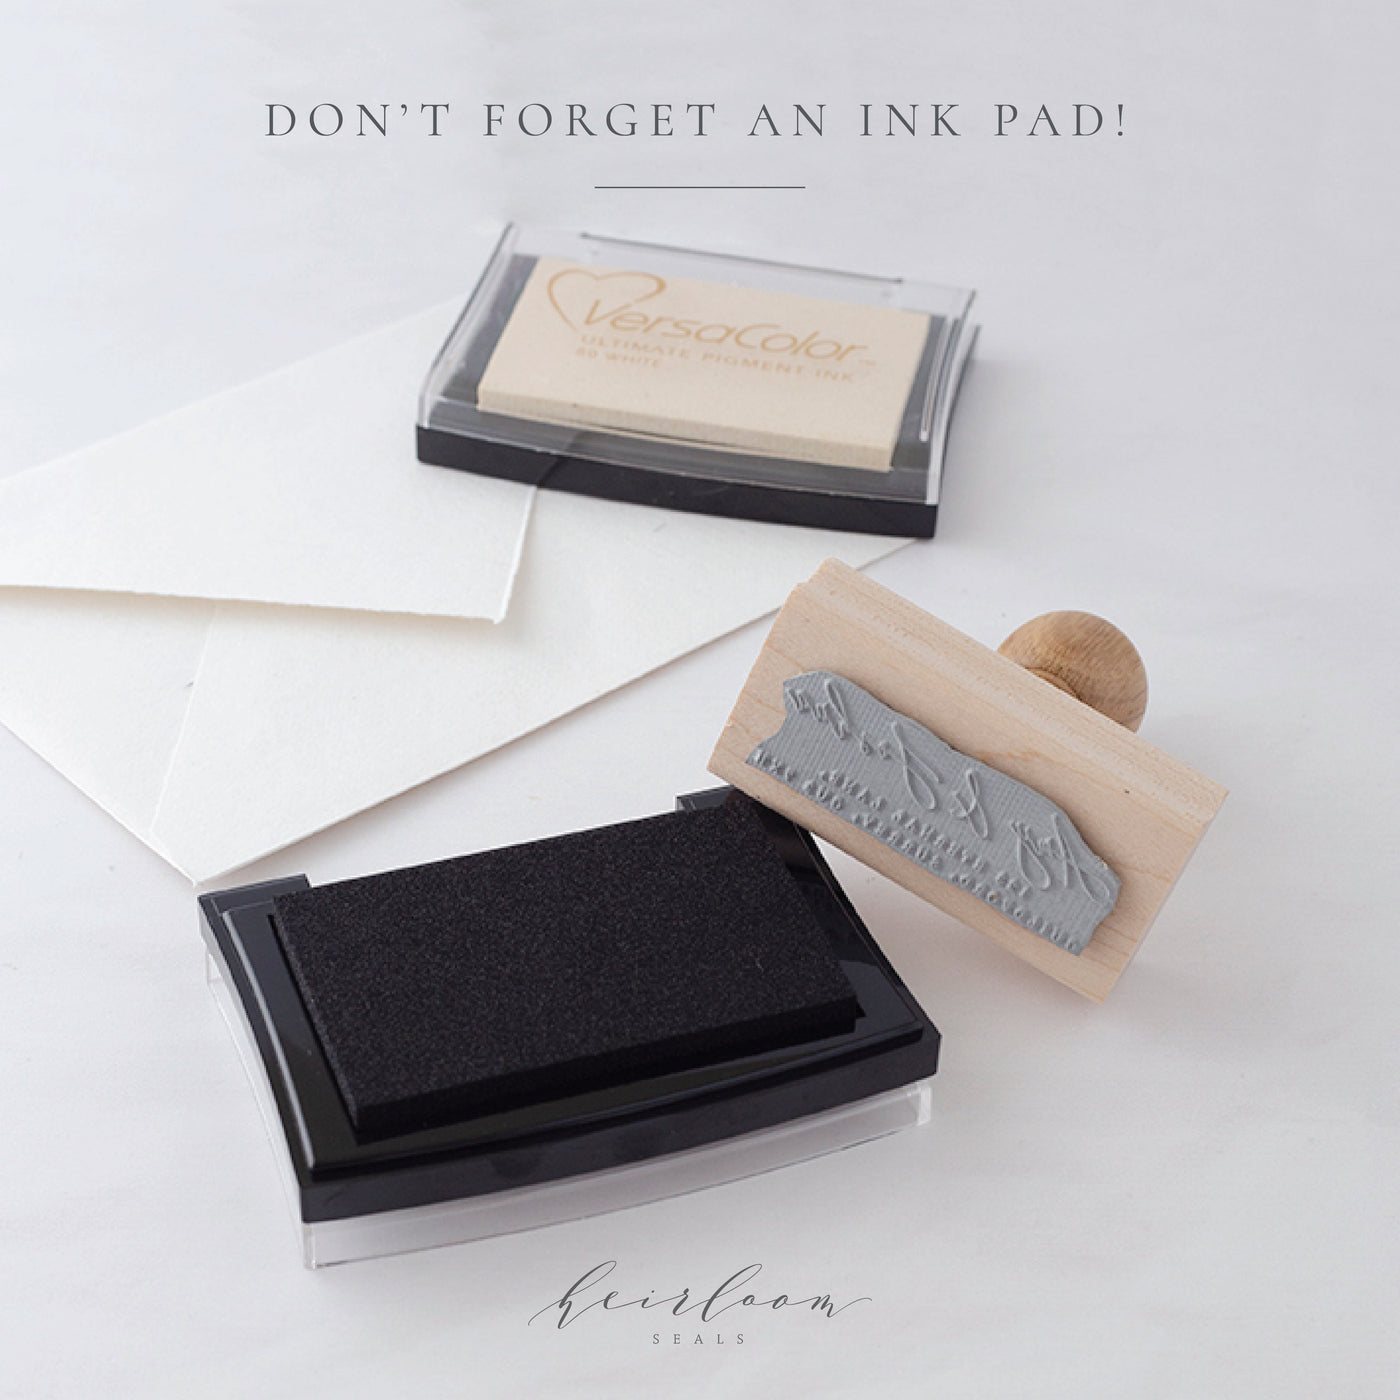 Ink Pads for Rubber Stamps | Heirloom Seals